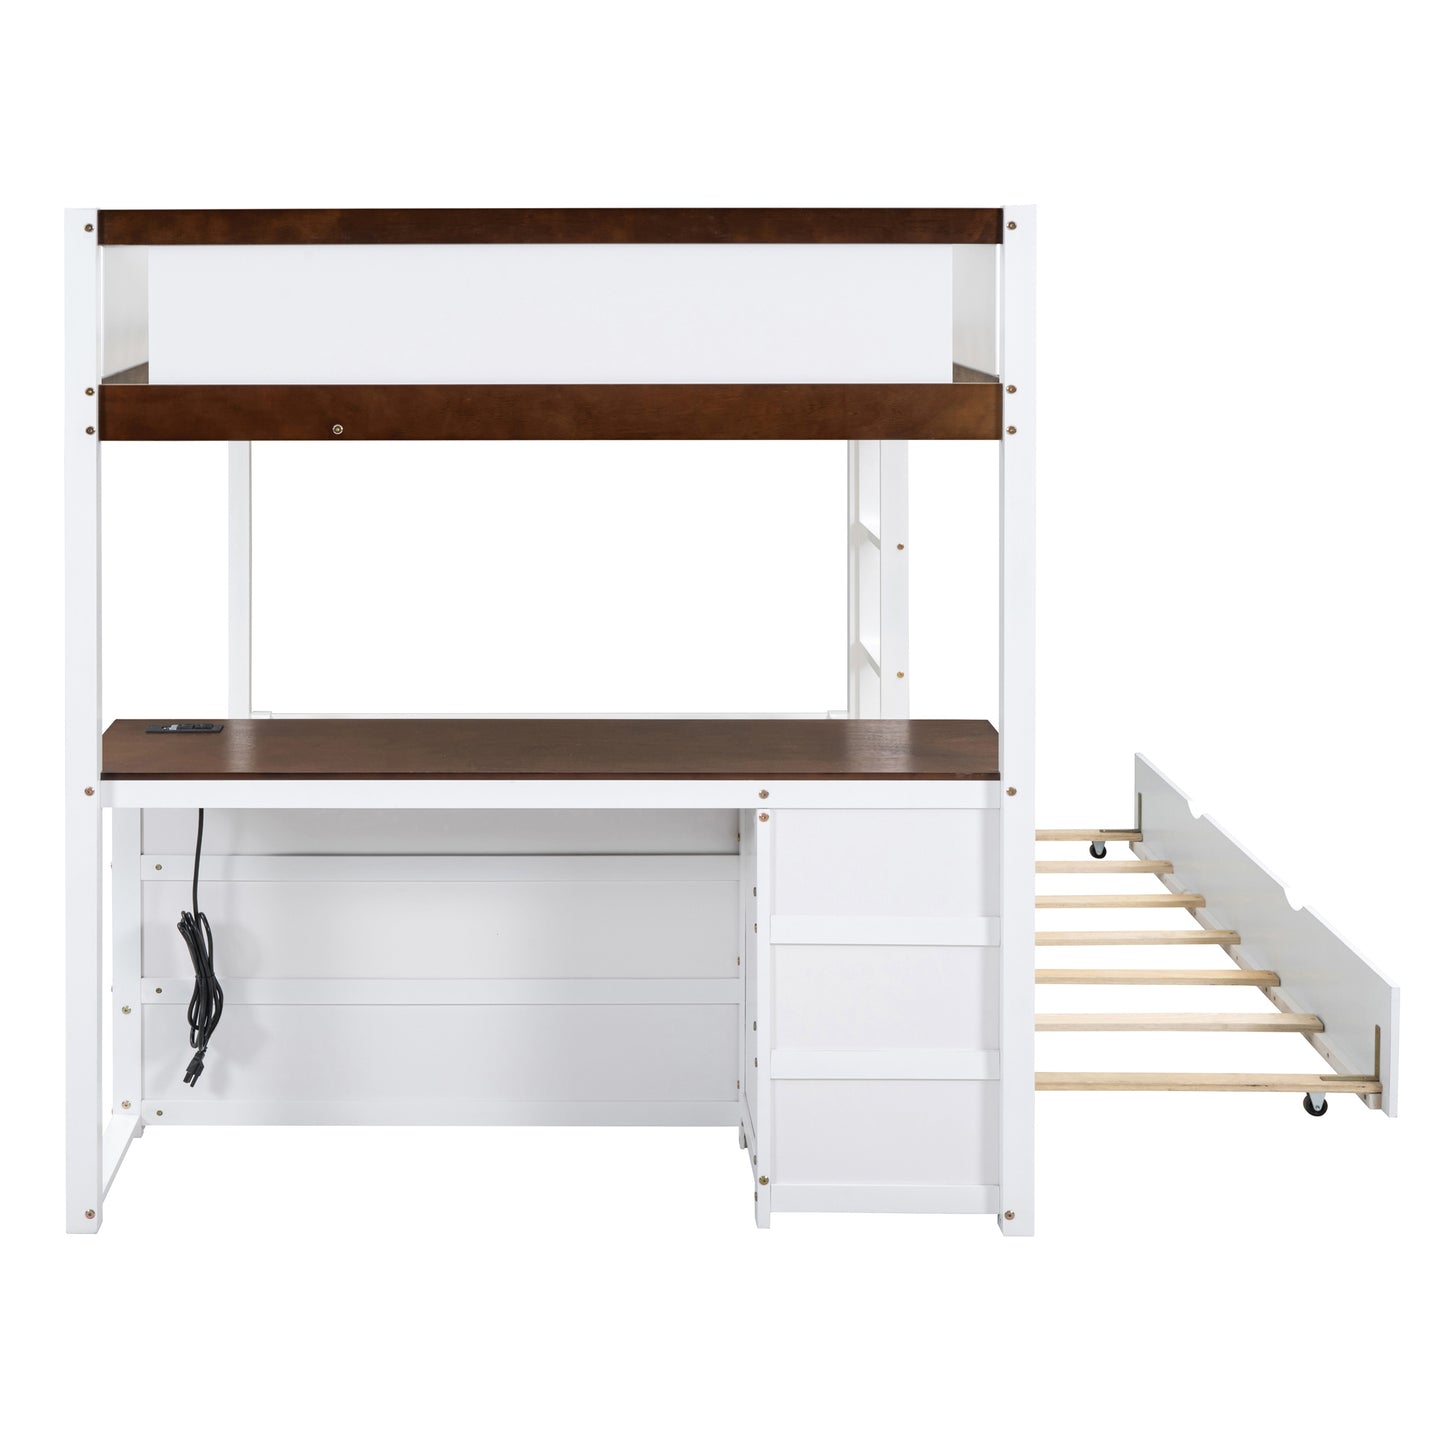 Full-Over-Full Bunk Bed with Twin Trundle, Desk, and Storage in White and Walnut - Space-Saving Bunk Bed with Trundle, Desk, and Storage in White/Walnut